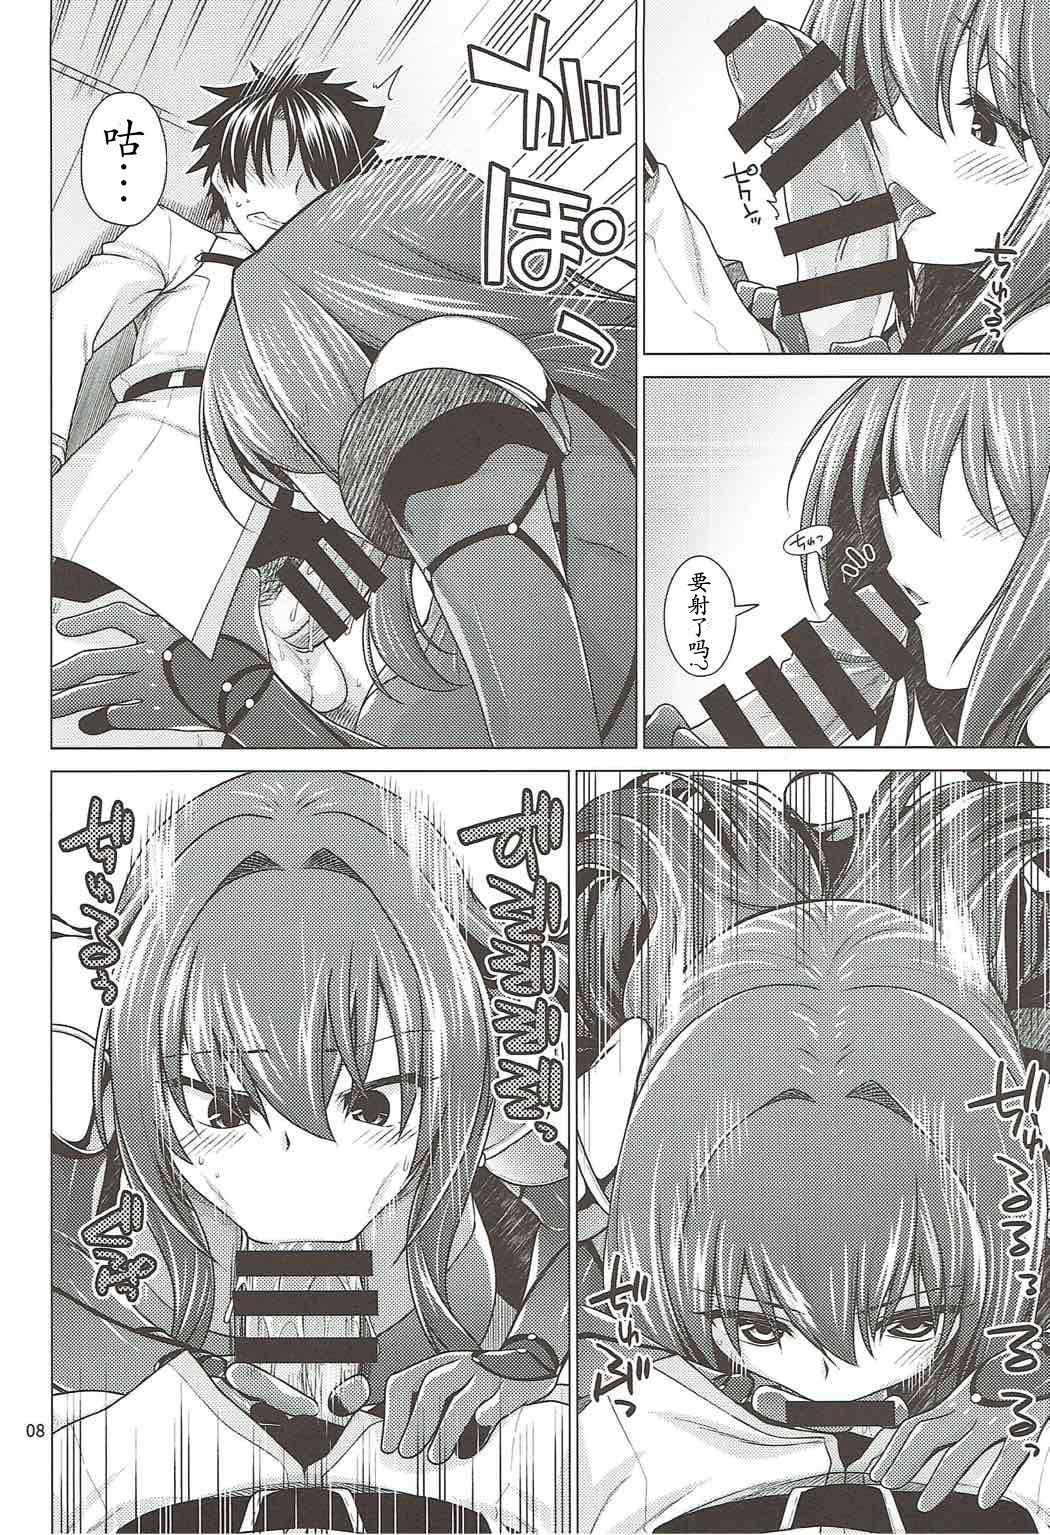 Spit Scathach Shishou to Celt Shiki Gachihamex! - Fate grand order Gay Cock - Page 8